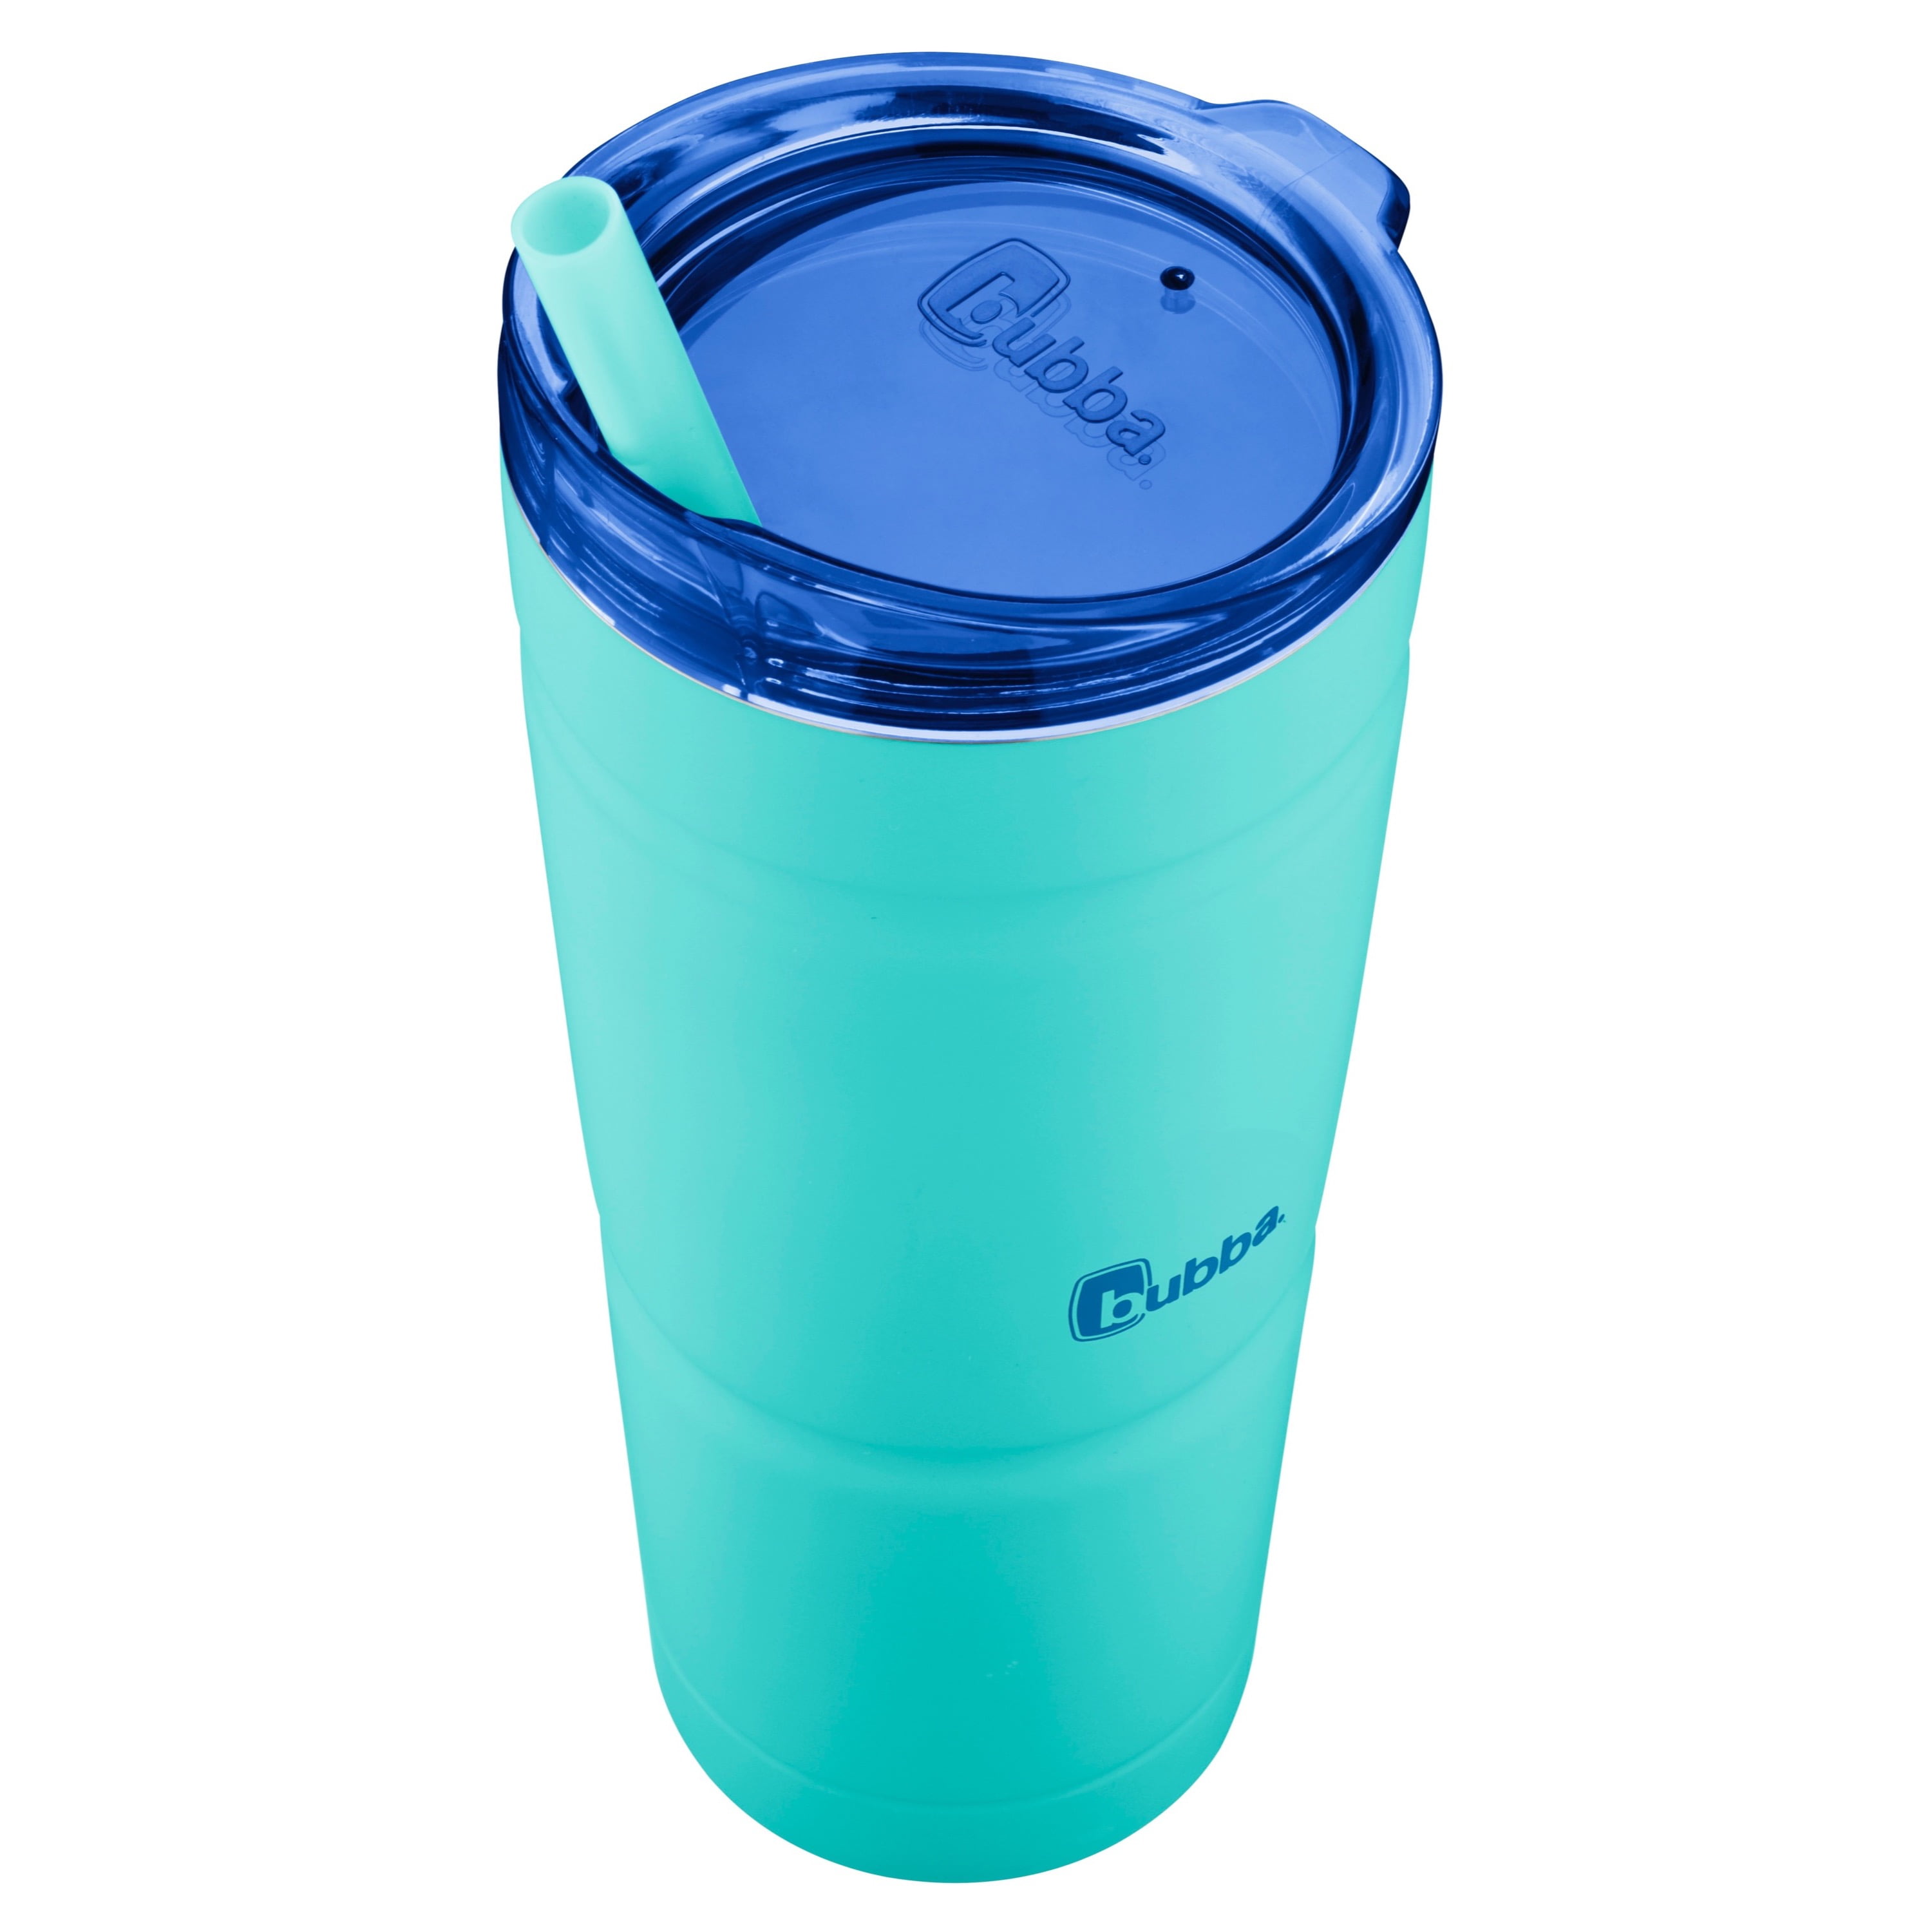 Bubba Envy Tumbler with Handle - Shop Kitchen & Dining at H-E-B